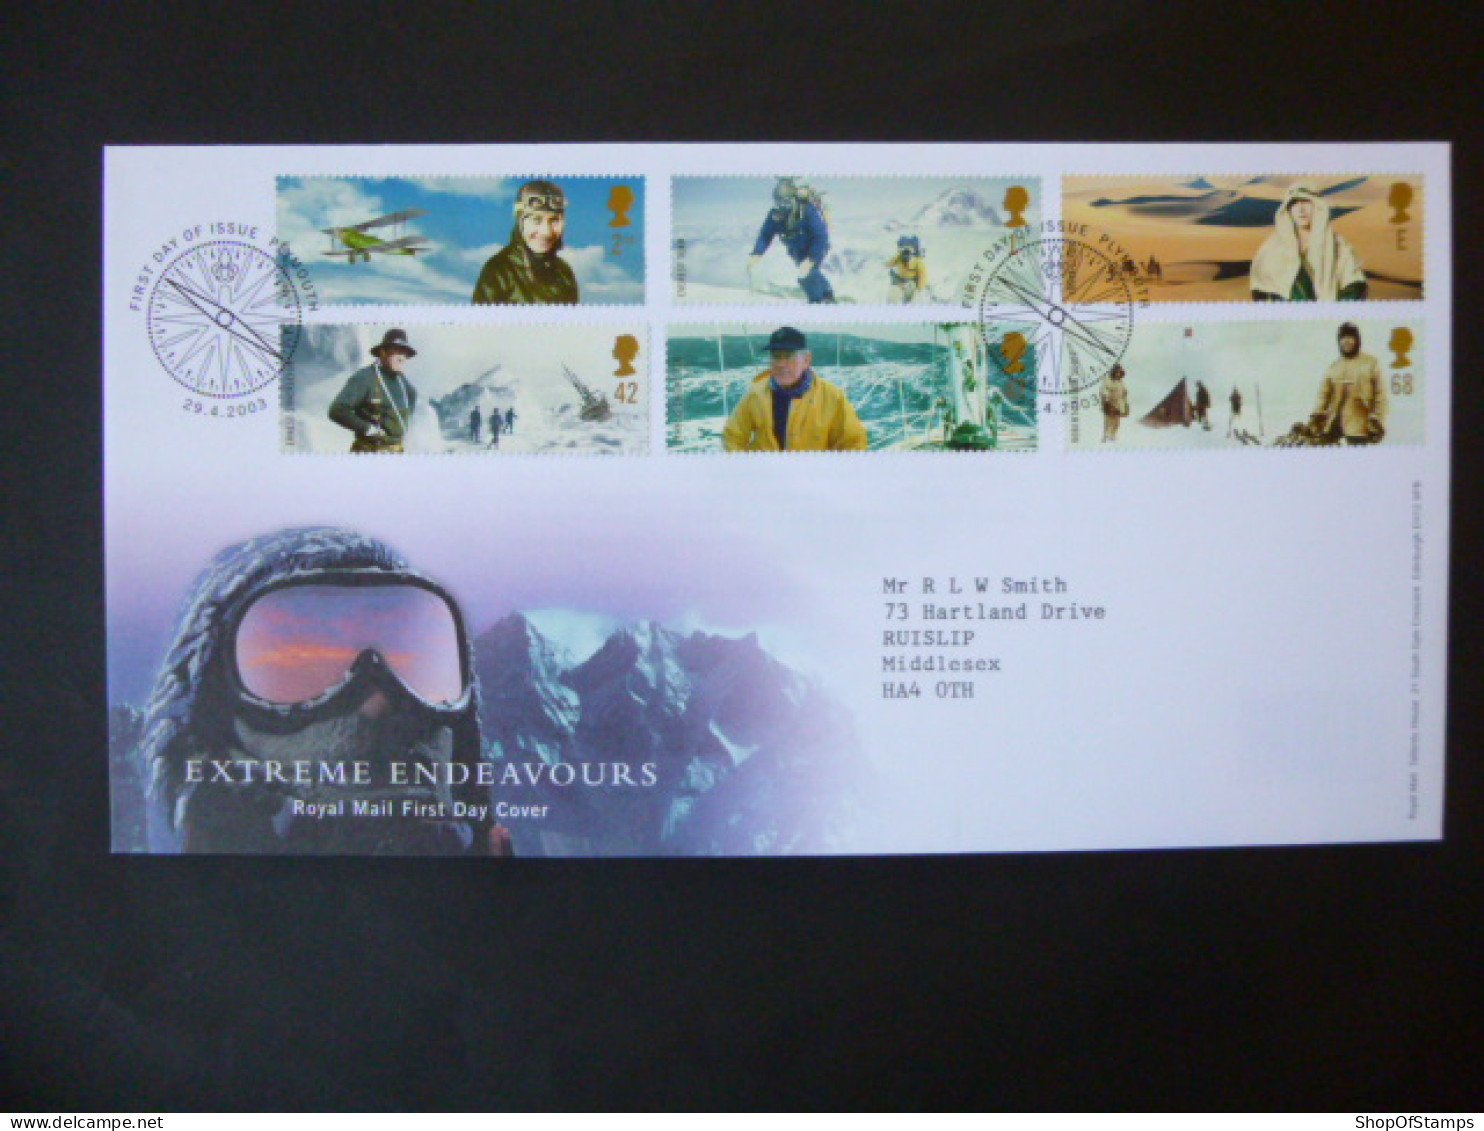 GREAT BRITAIN SG 2360-65 EXTREME ENDEAVOURS BRITISH EXPLORERS FDC PLYMOUTH - Unclassified